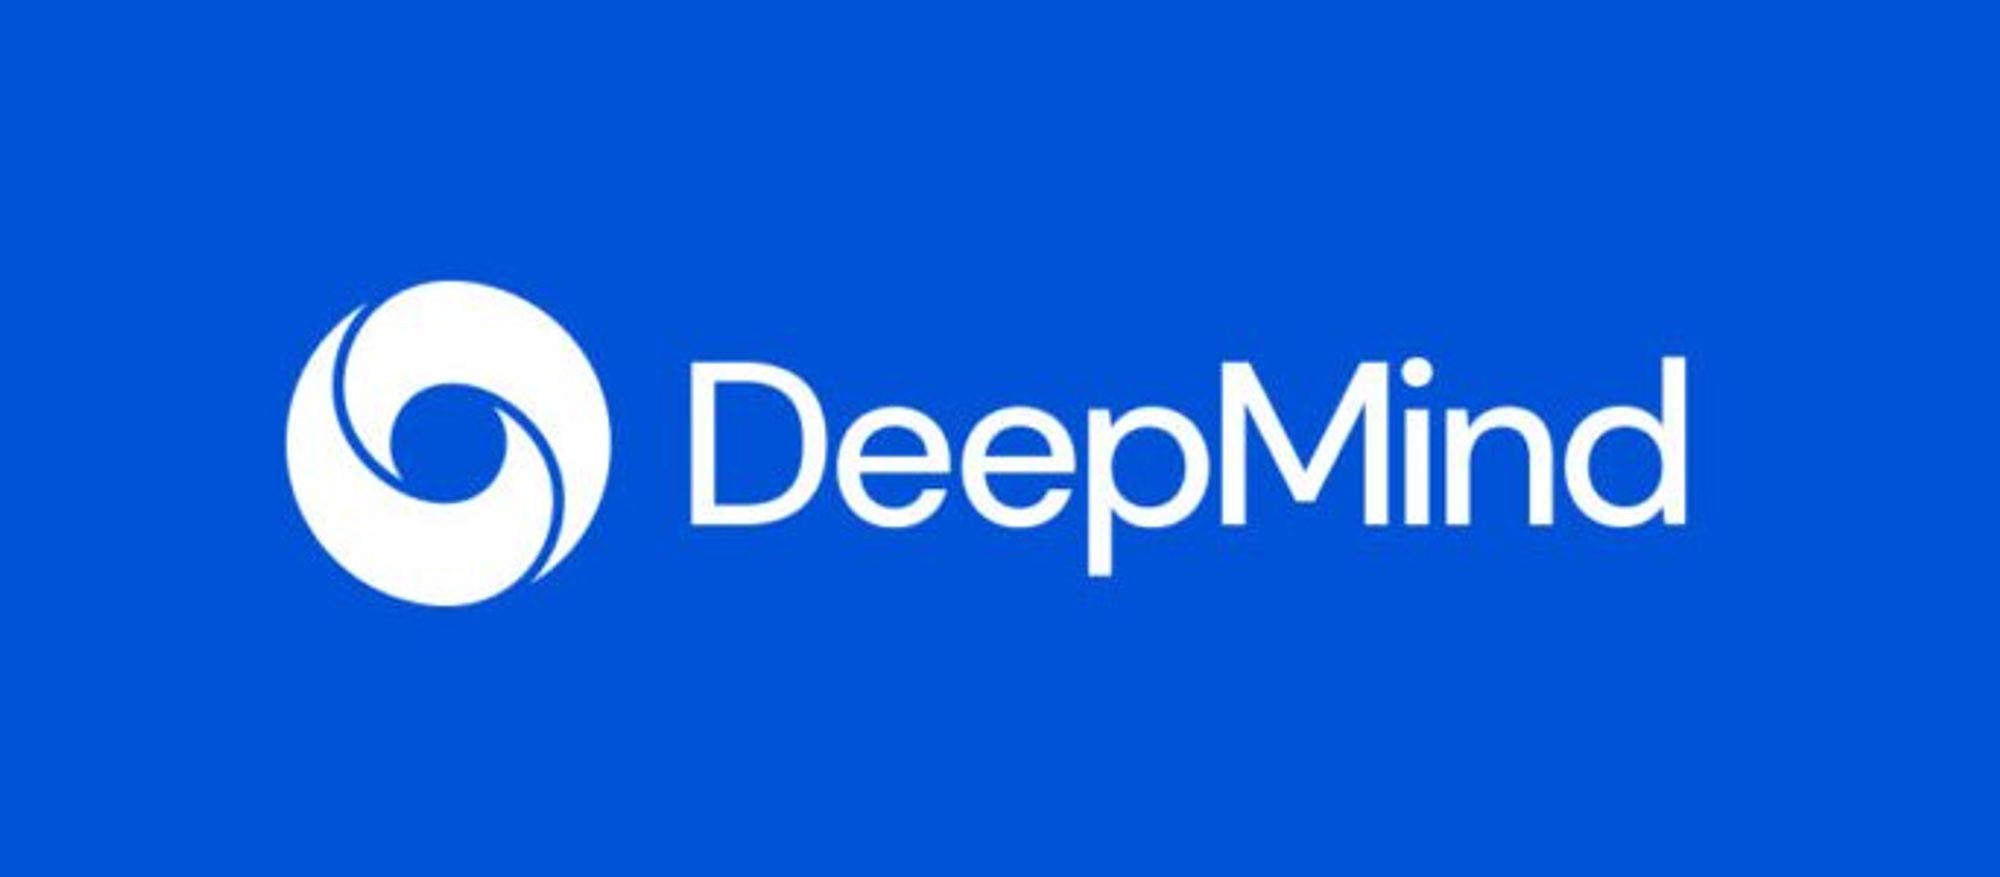 Google’s AI panic forces merger of rival divisions, DeepMind and Brain | Ars Technica